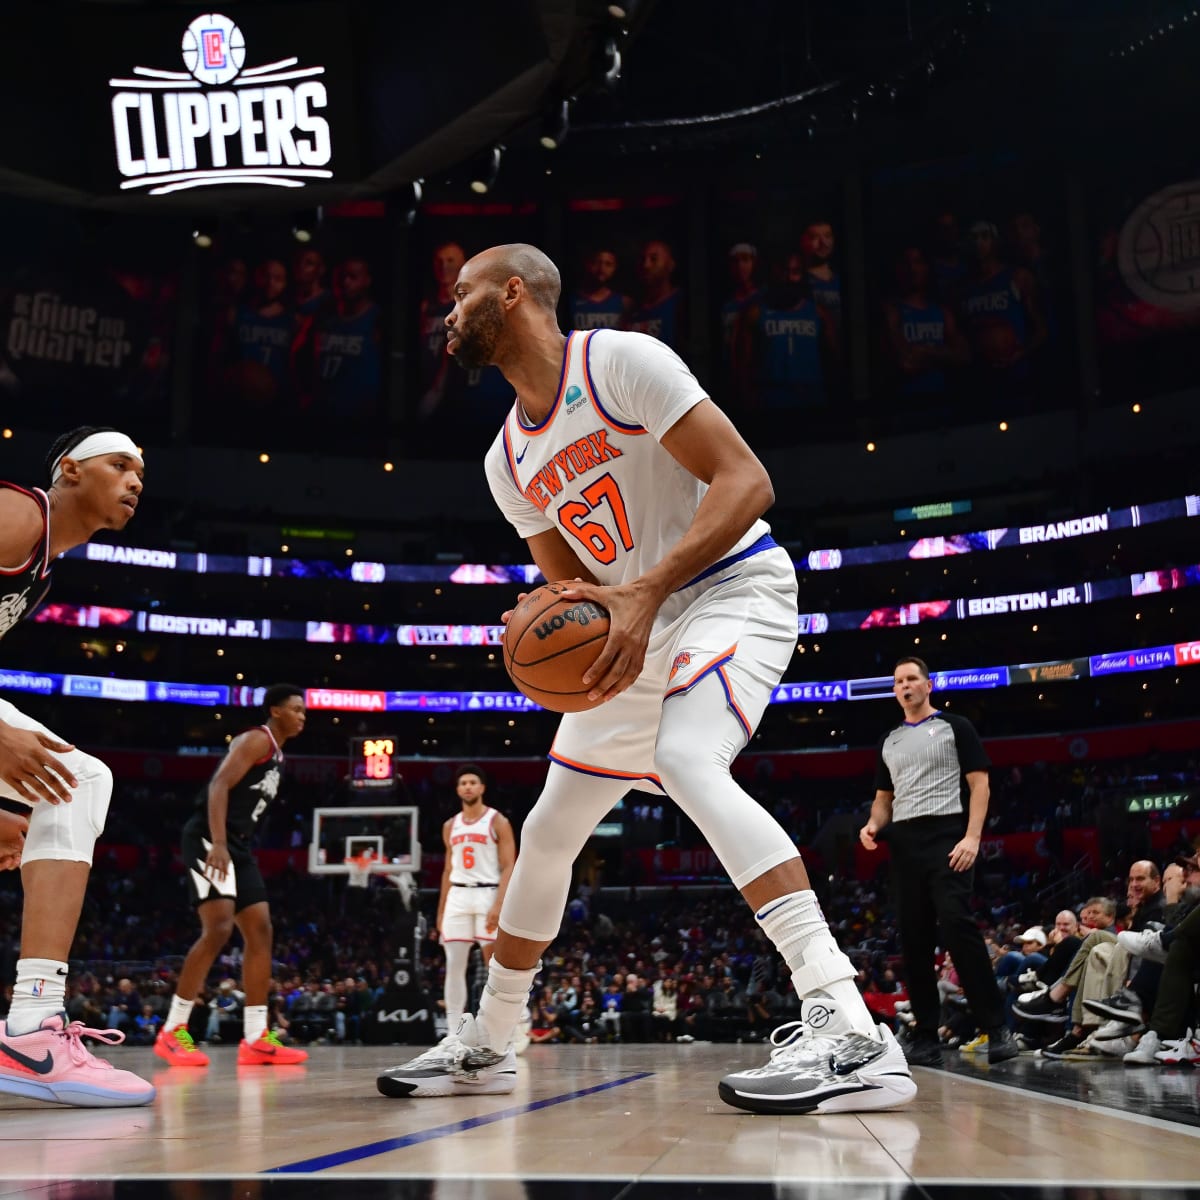 Inspired' Taj Gibson up for 2nd 10-day contract with Knicks